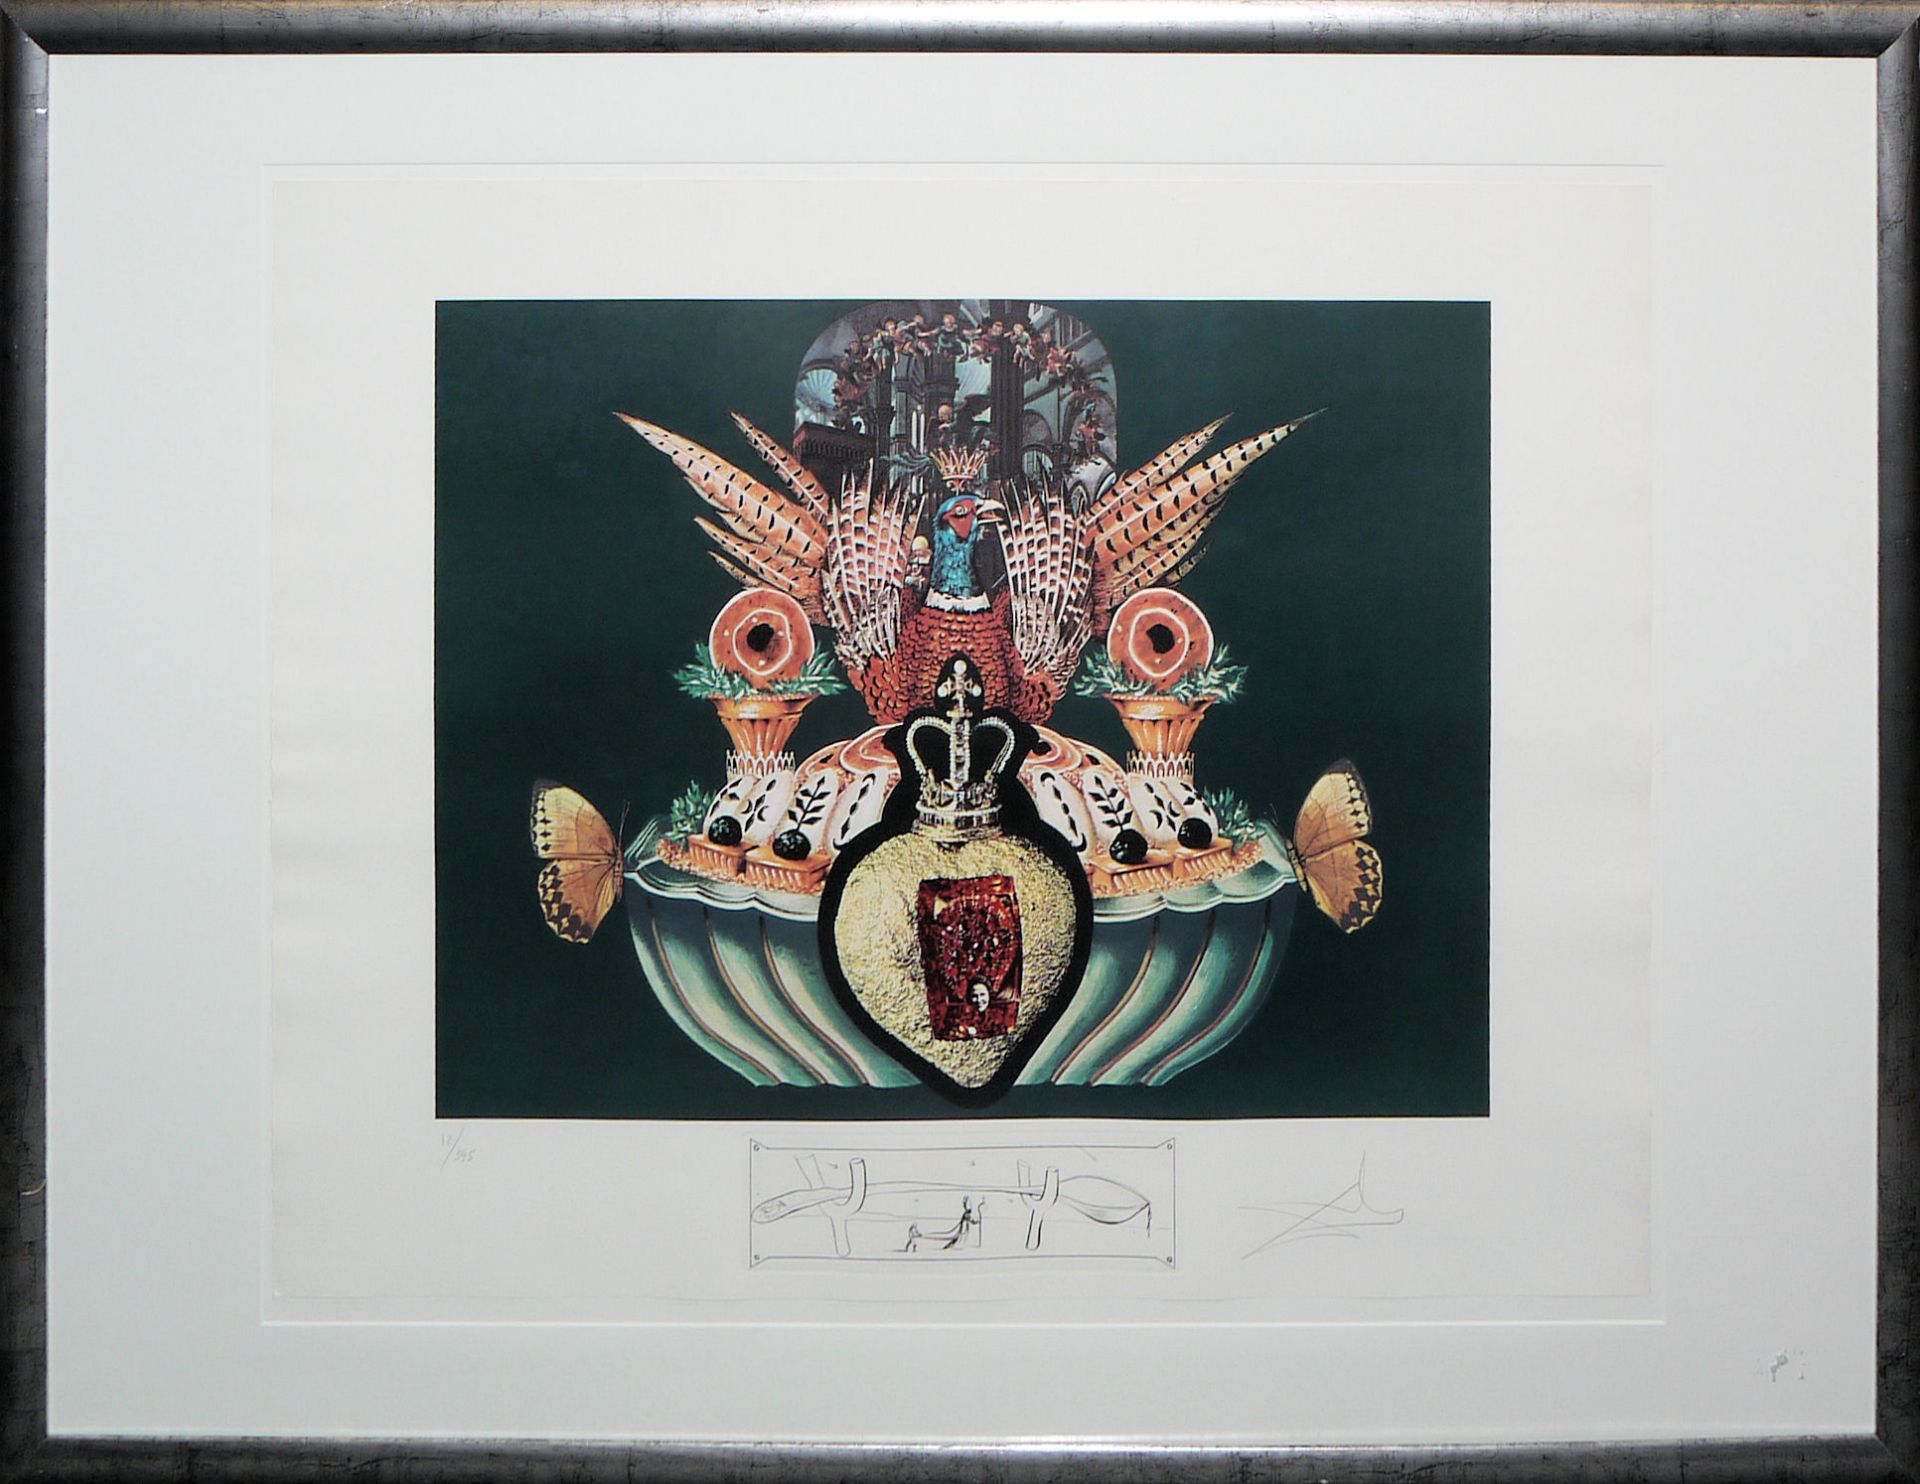 Salvador Dalí, "Les Chairs monarchiques", from: "Les Dîners de Gala", lithographs from 1971, signed - Image 2 of 3